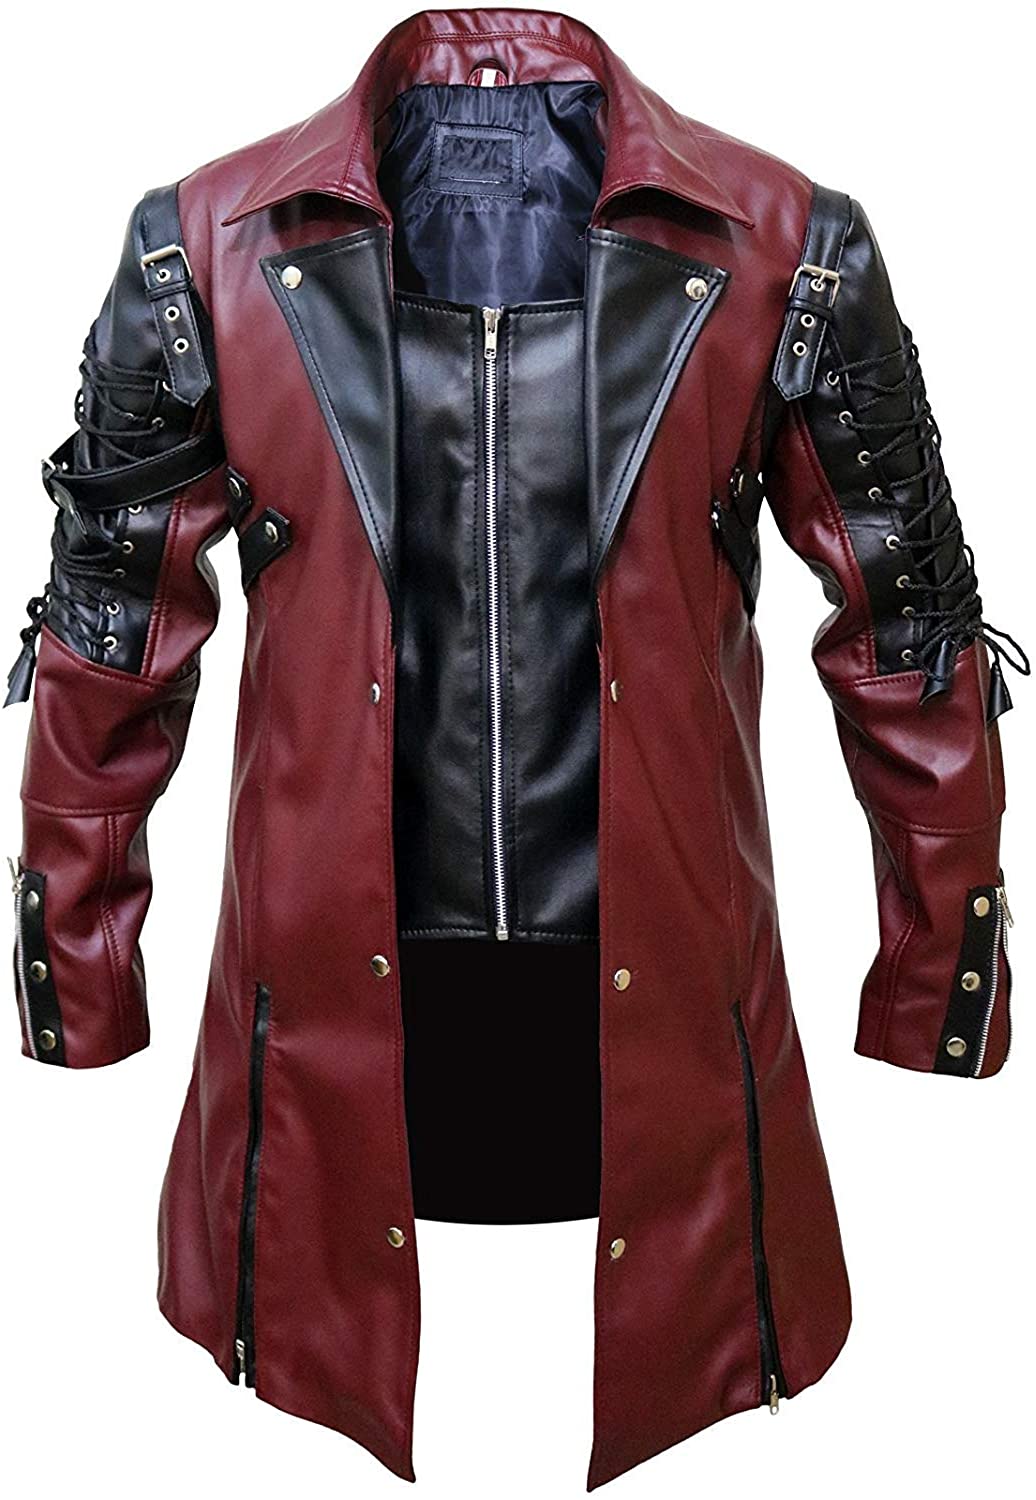 All sizes! "POISON" New Leather Biker Motorcycle Jacket